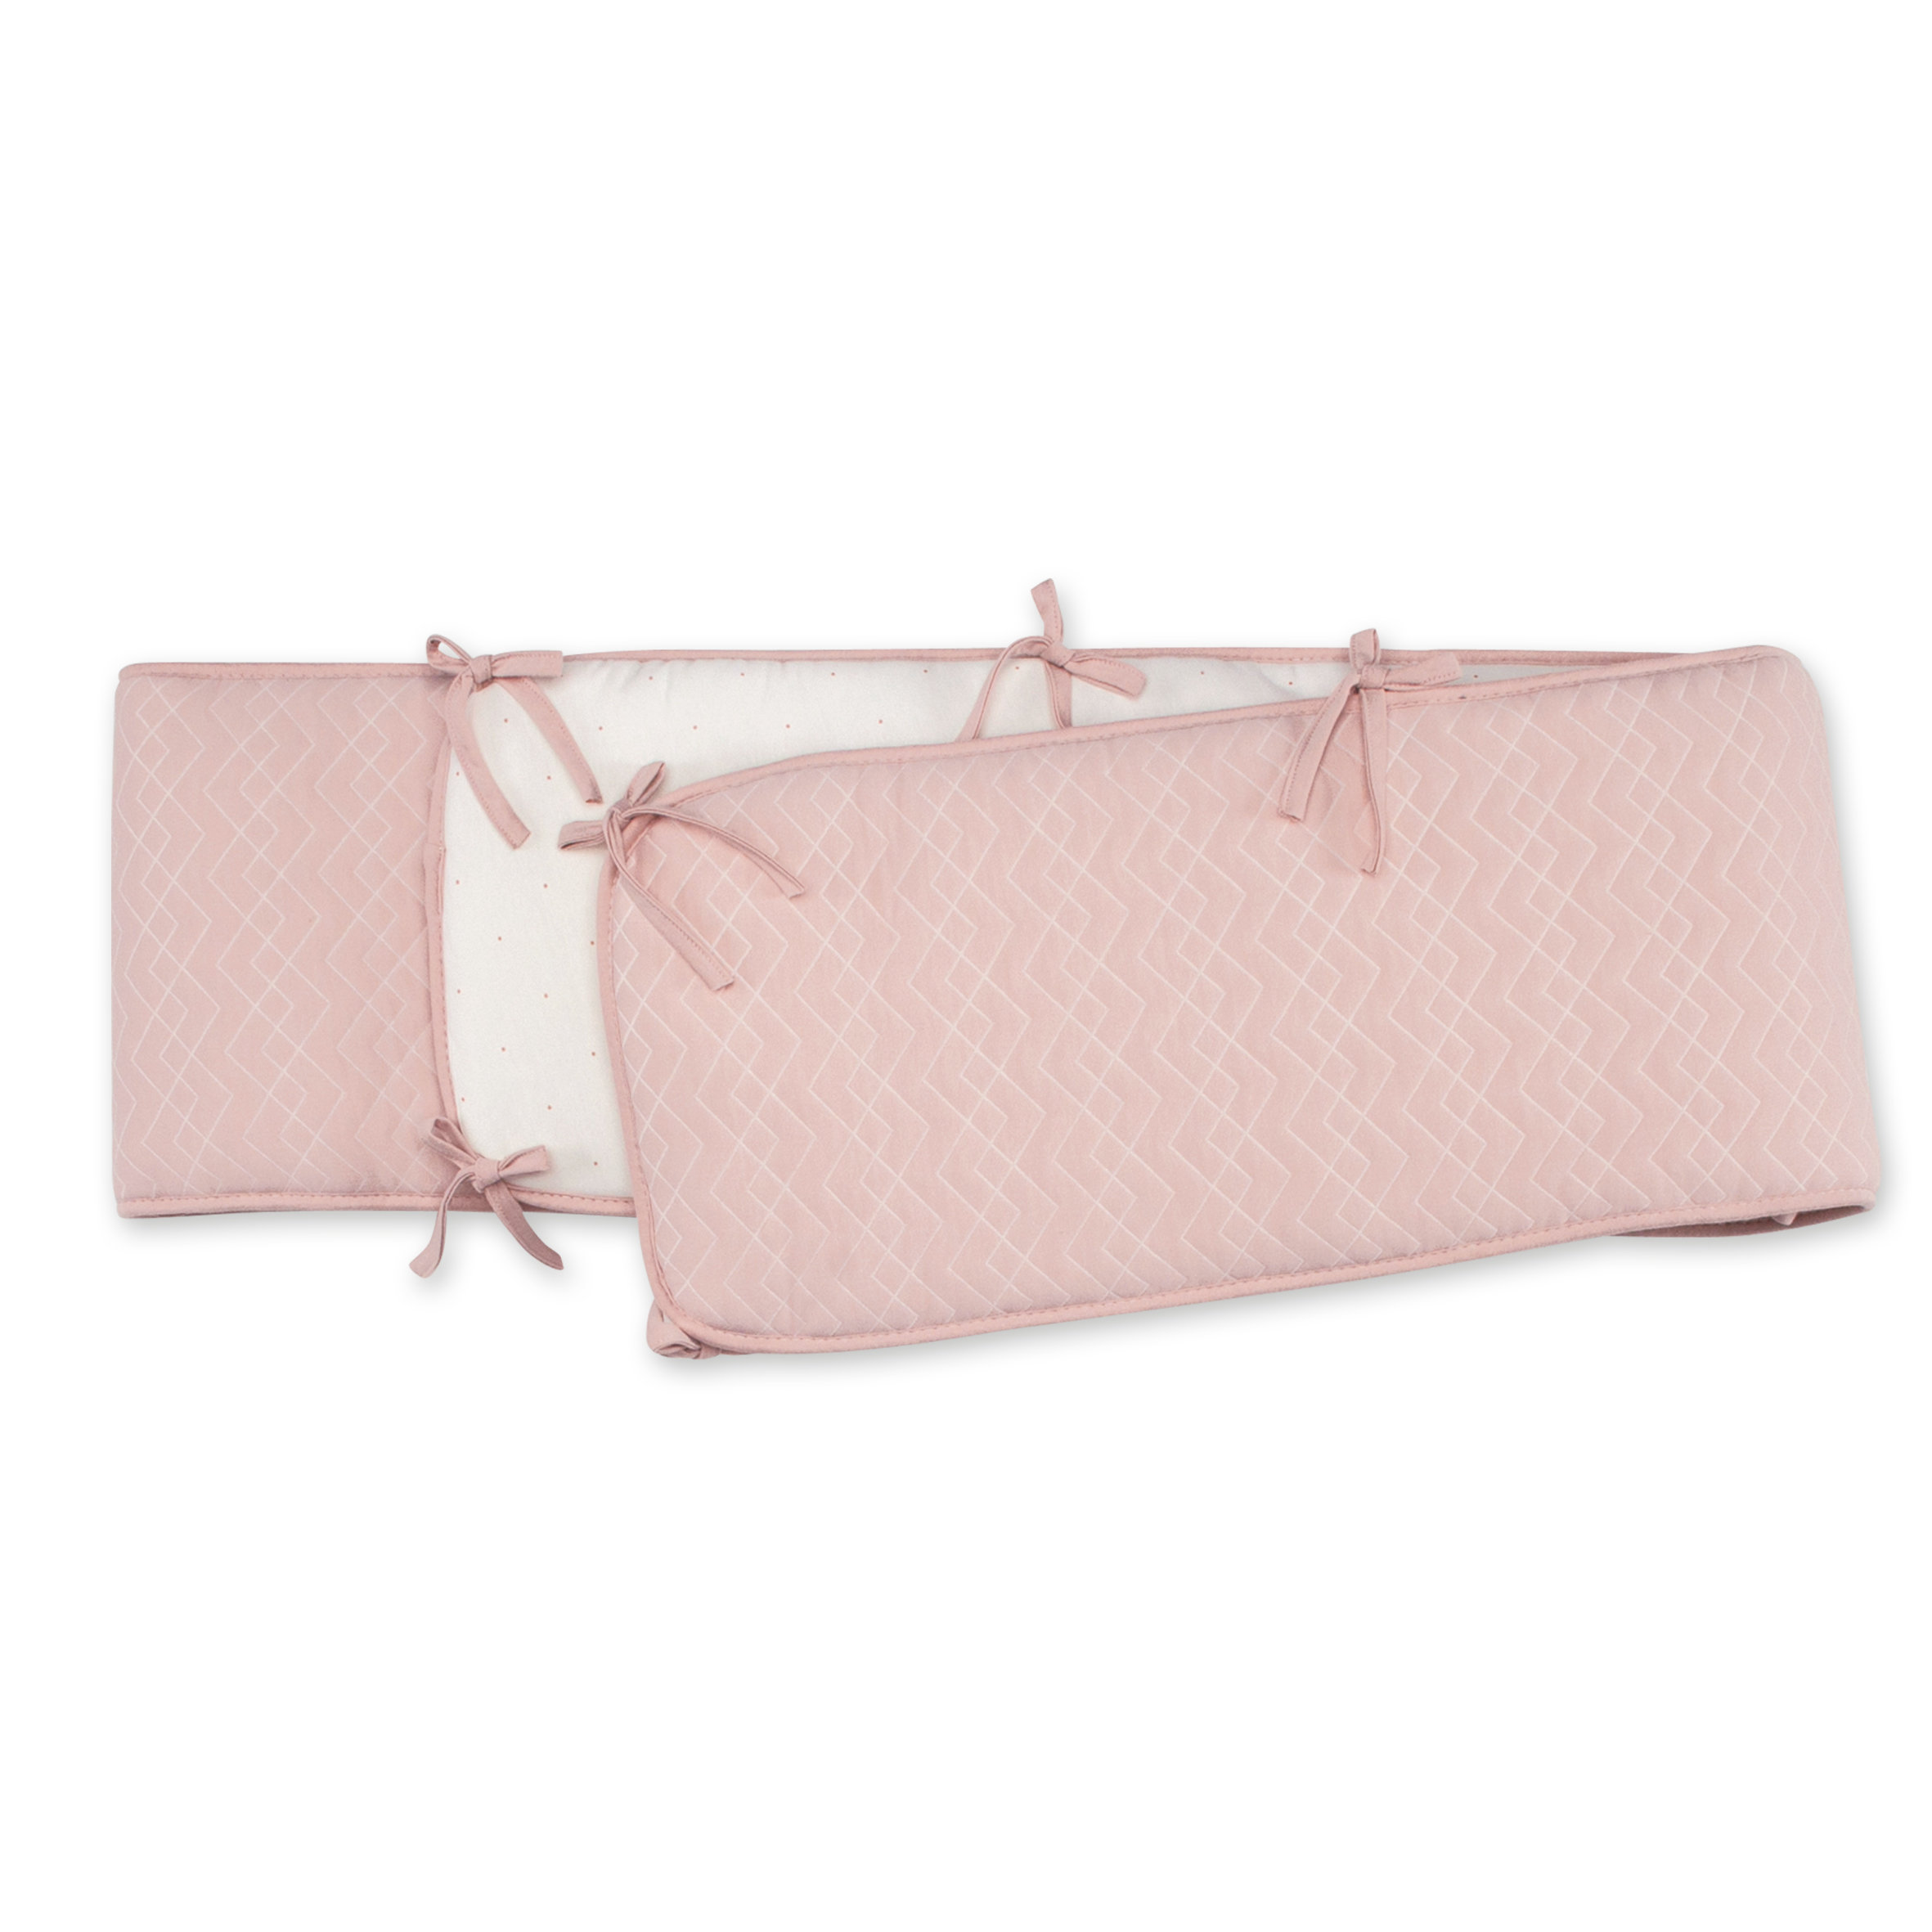 Protector de parque Pady quilted jersey + jersey 75x95x28cm OSAKA Rosa vieja